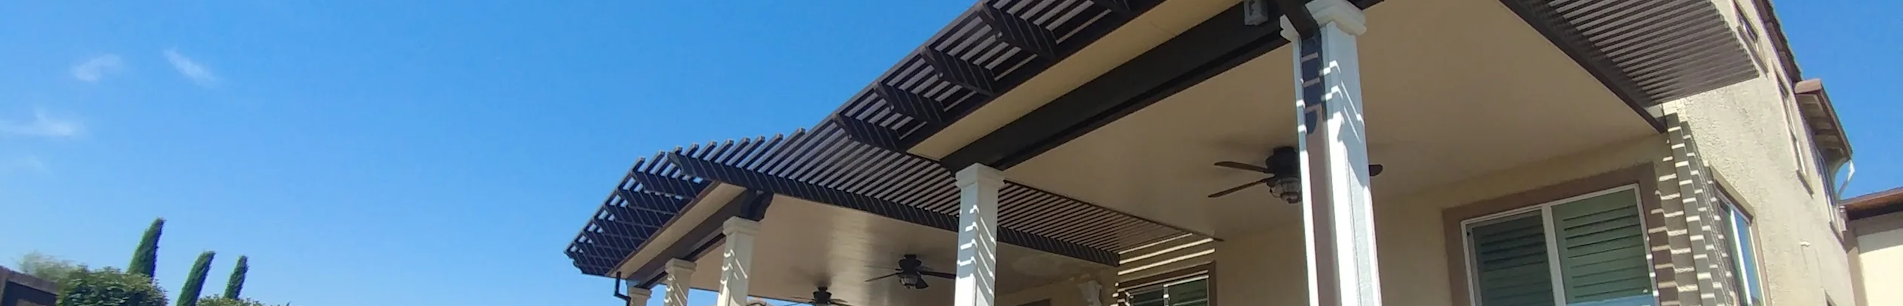 Aluminum Patio Covers Gallery - Gallery of Patio Cover Design & Installation West Sacramento Citrus Heights CA